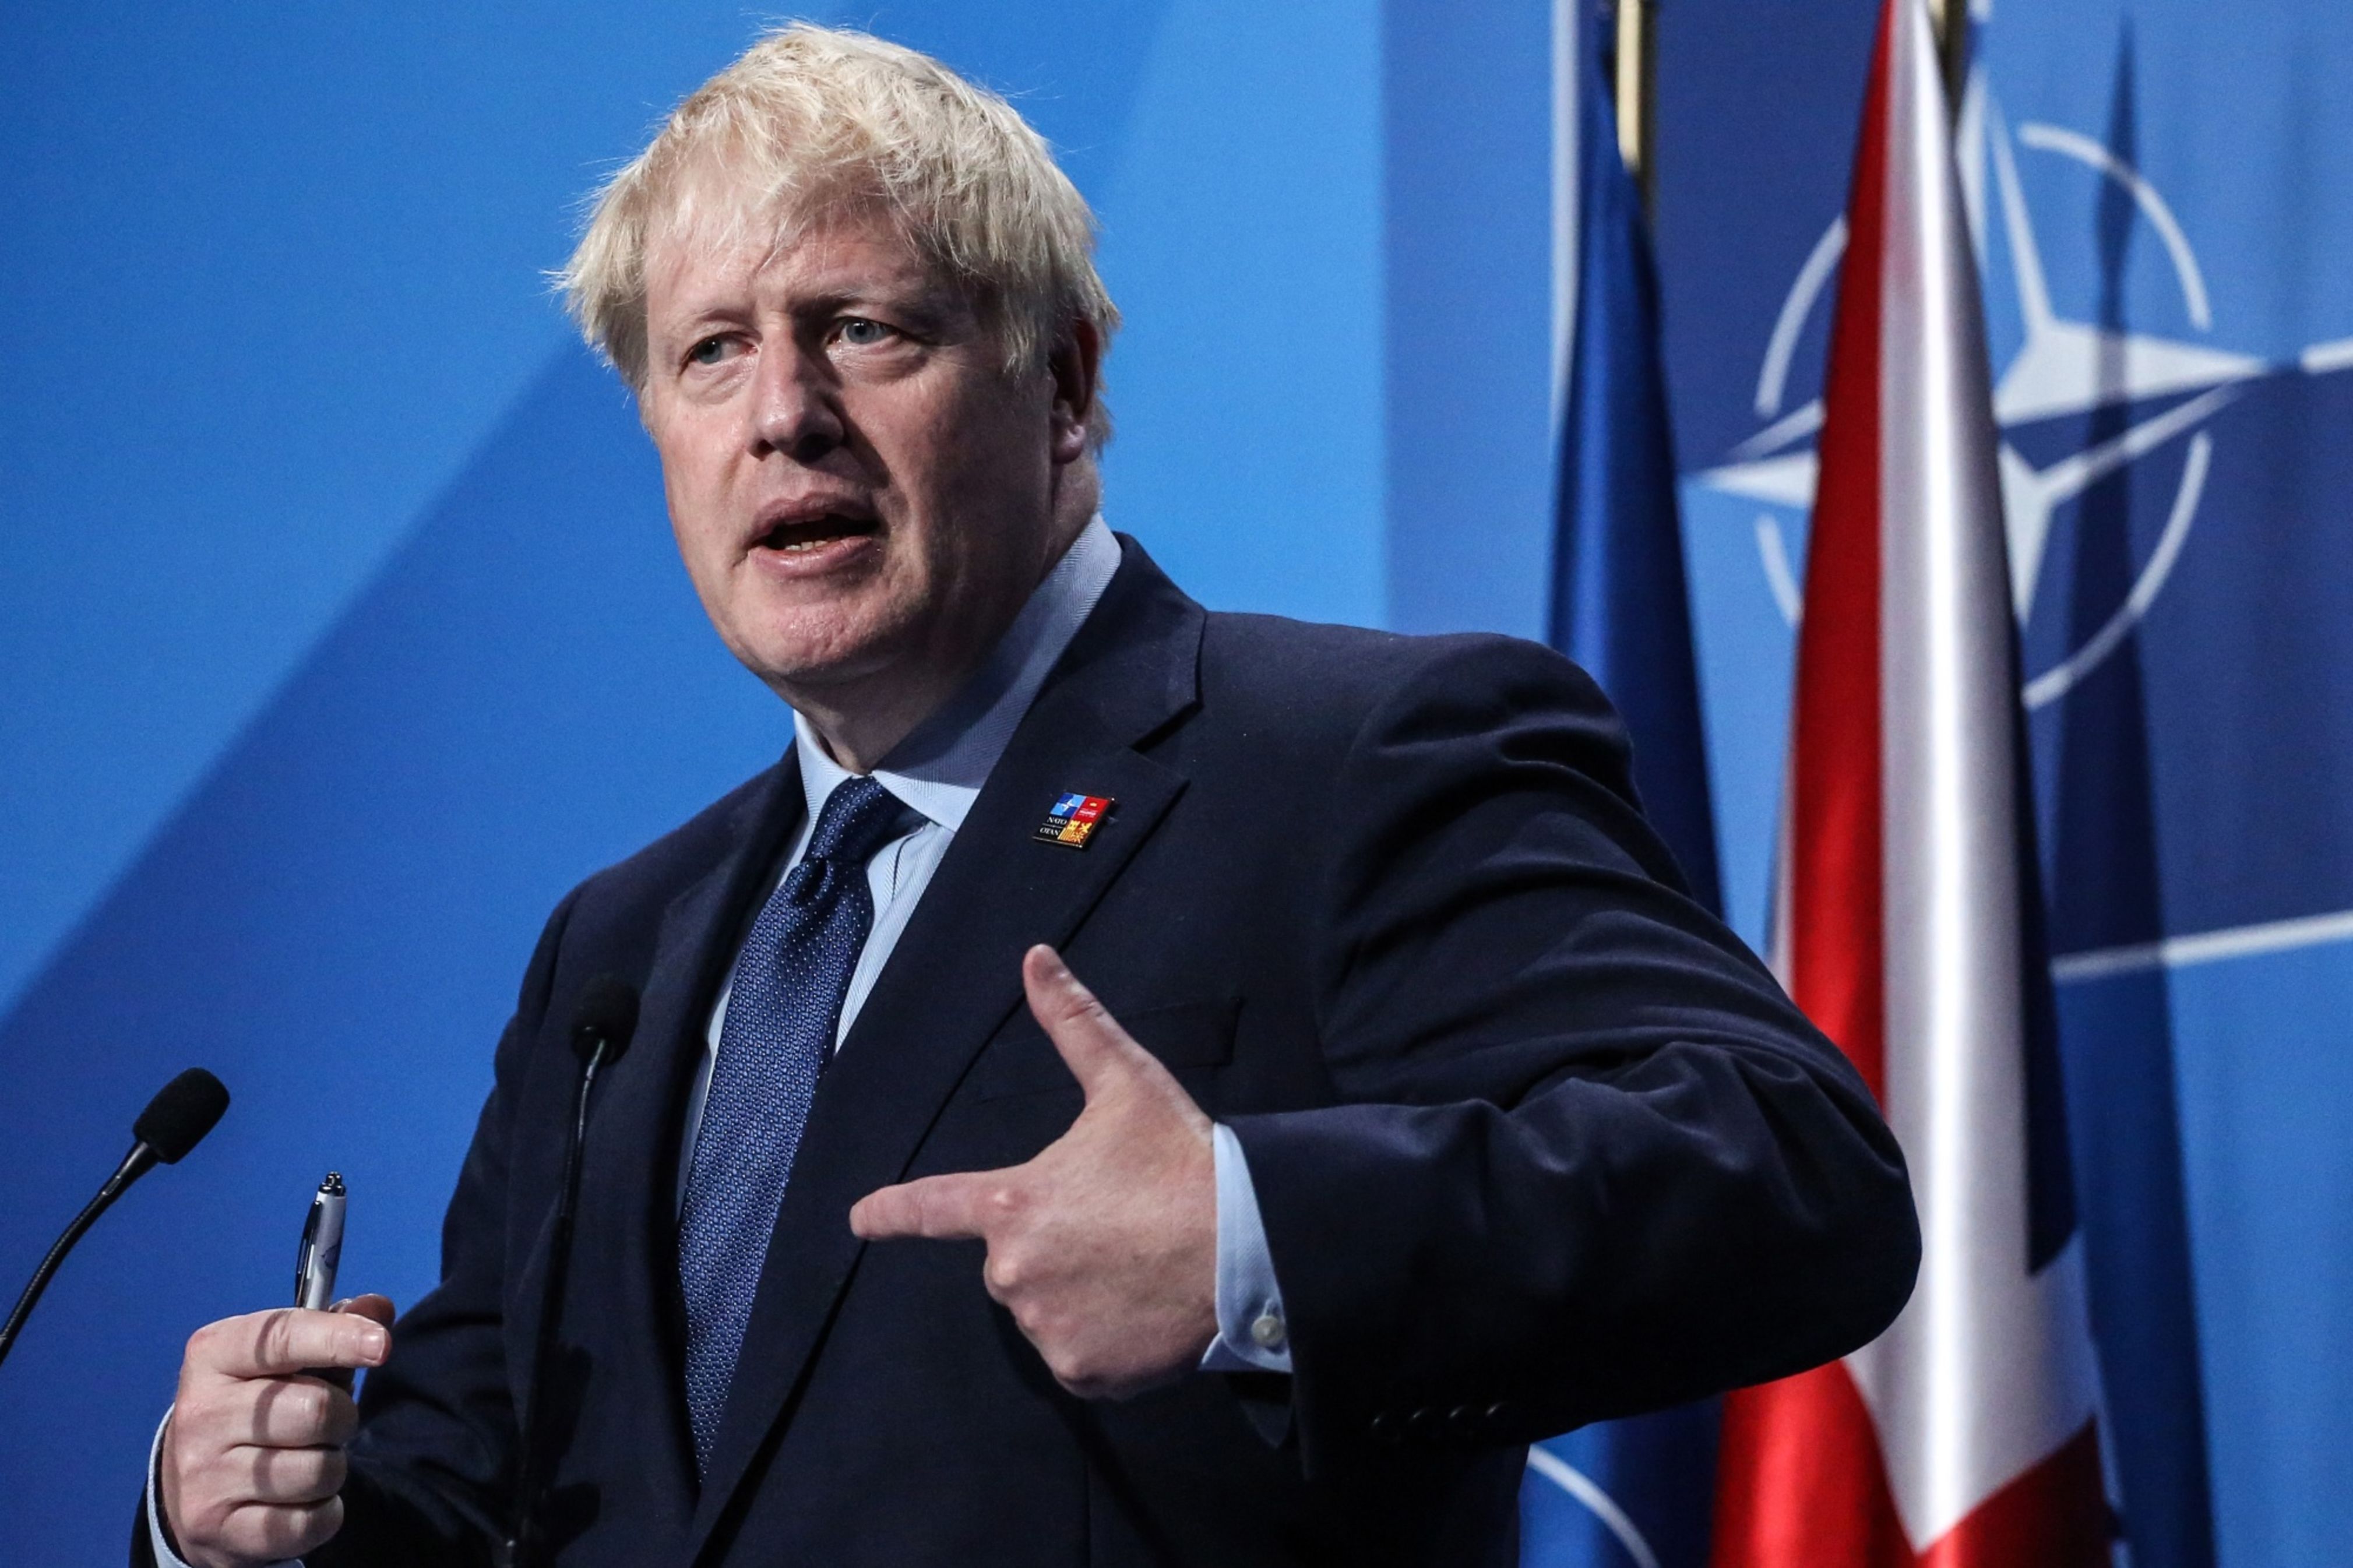 U.K. Prime Minister Boris Johnson at a news conference following the final day of the North Atlantic Treaty Organization (NATO) summit in Madrid, Spain, on June 30, 2022. (Valeria Mongelli—Bloomberg/Getty Images)